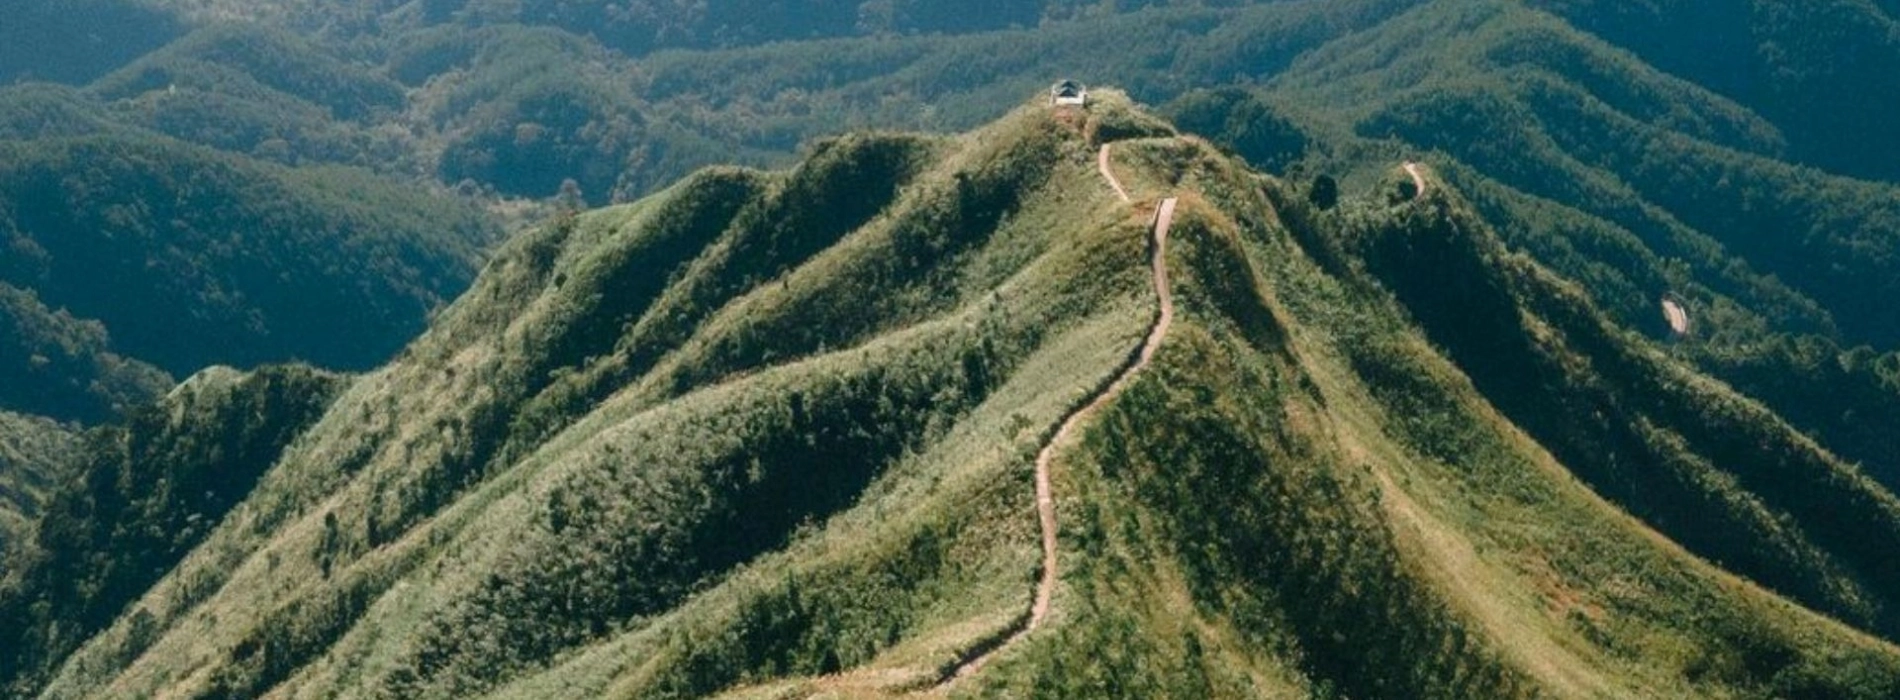 The famous mountains for trekking in Vietnam